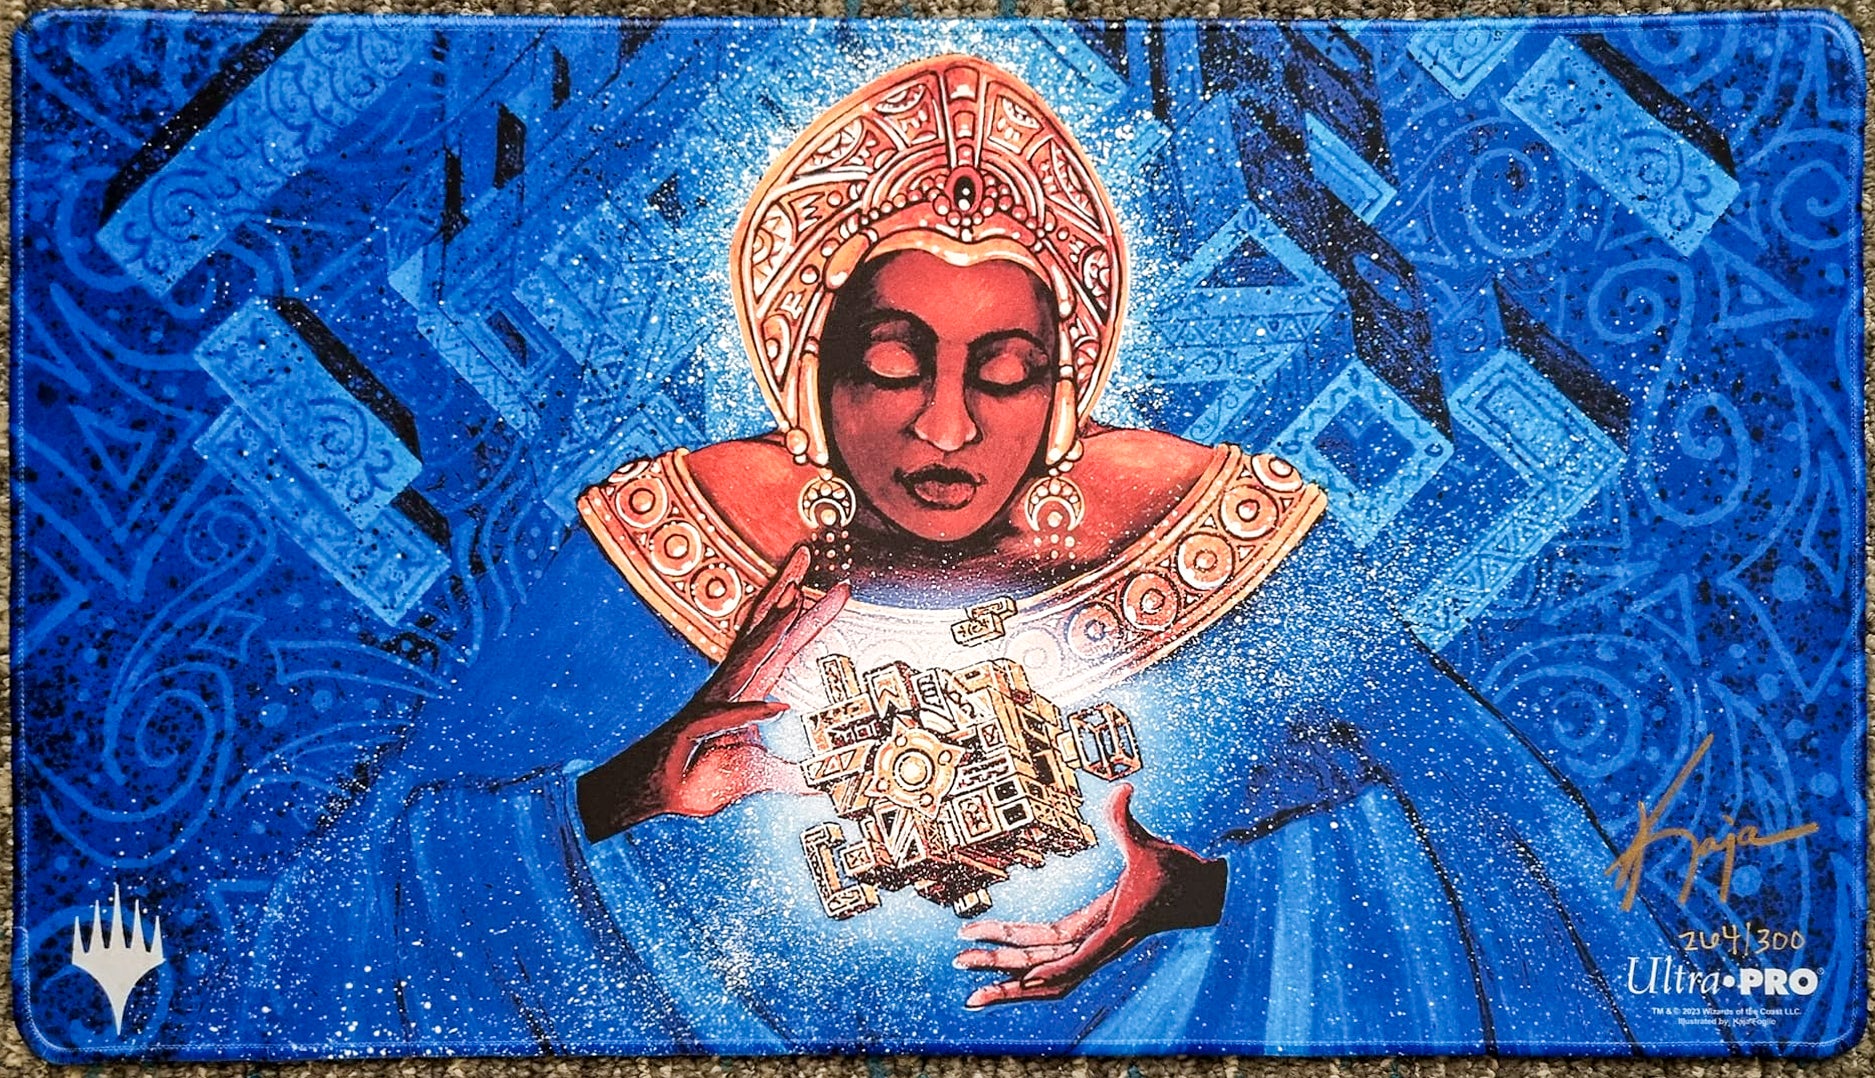 Teferi's Puzzle Box - Kaja Foglio - Limited Edition [300 Copies] - Embroidered - Signed by the Artist - MTG Playmat